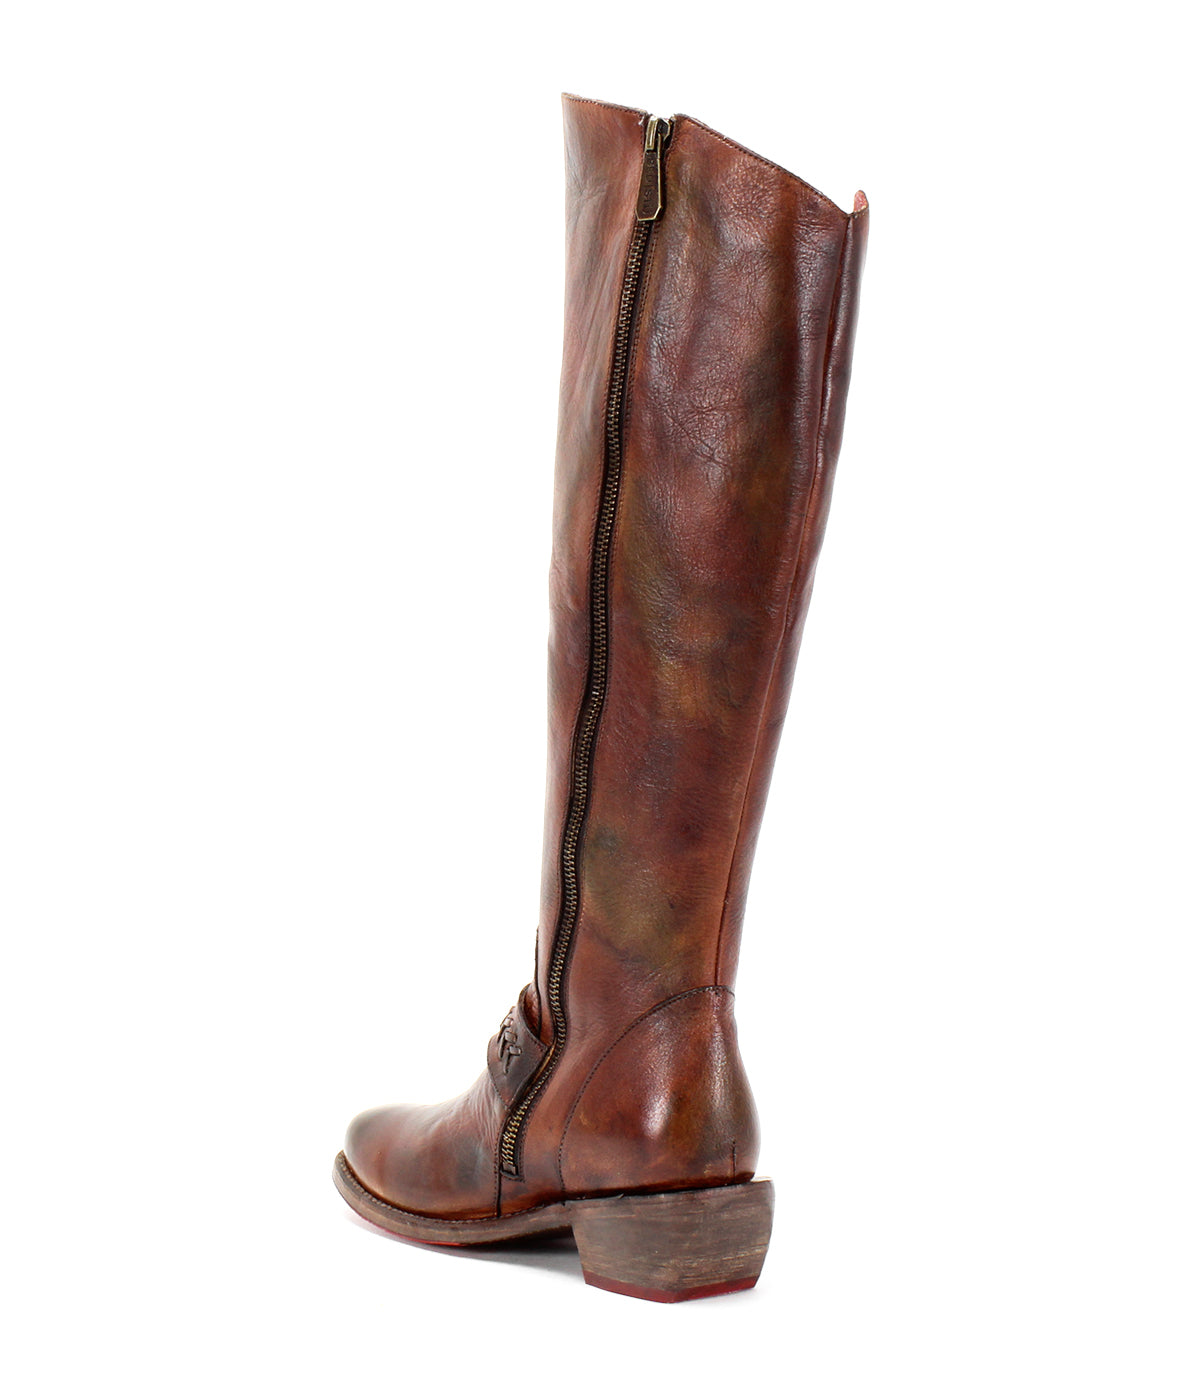 A women's brown riding boot with a zipper on the side, the Takoma by Bed Stu.